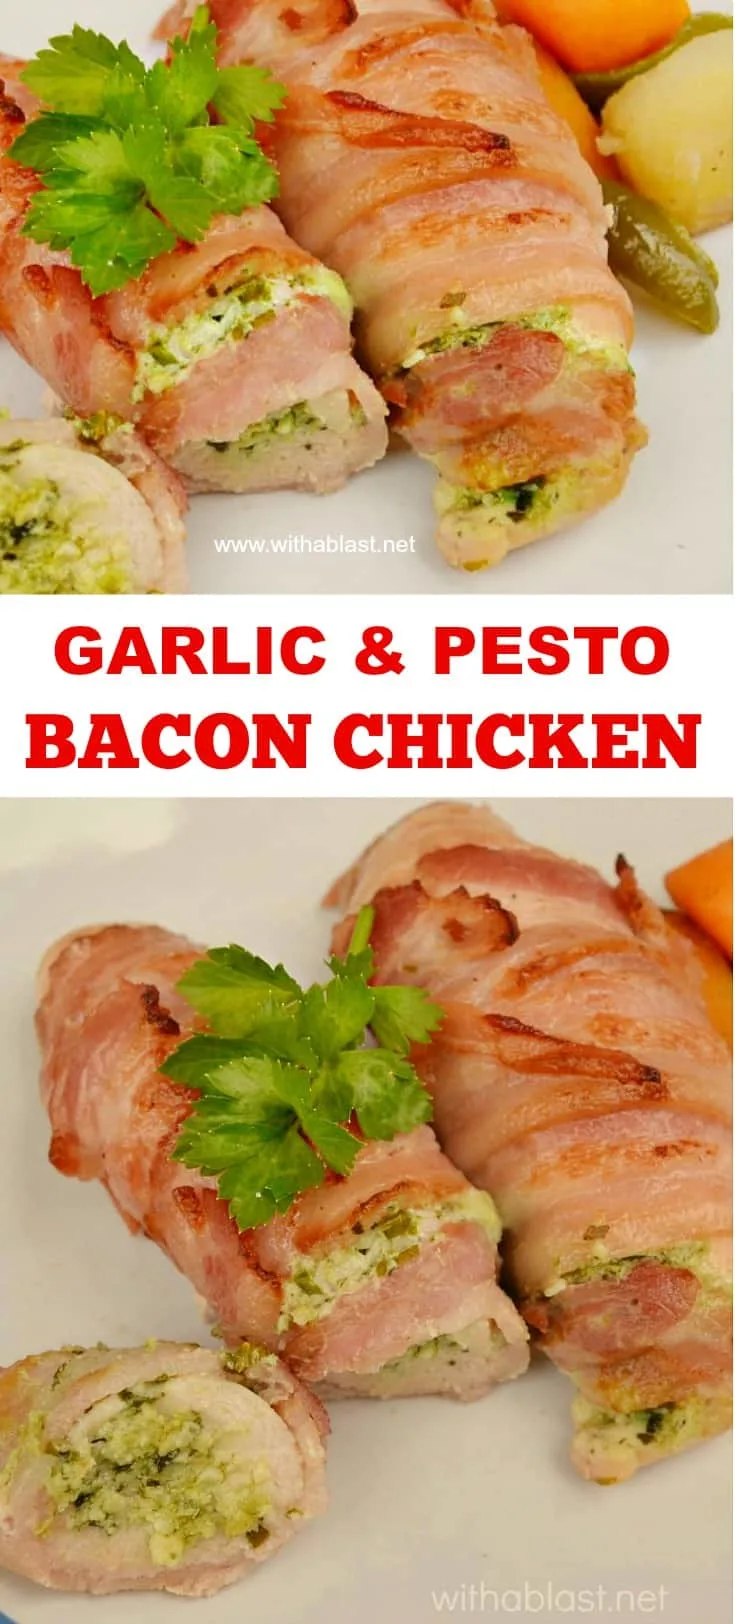 Garlic and Pesto Bacon Chicken is tender, juicy and deliciously cream cheese filled - all wrapped in bacon to make the Chicken extra special #ChickenRecipes #StuffedChicken #PestoChicken #BaconWrappedChicken 